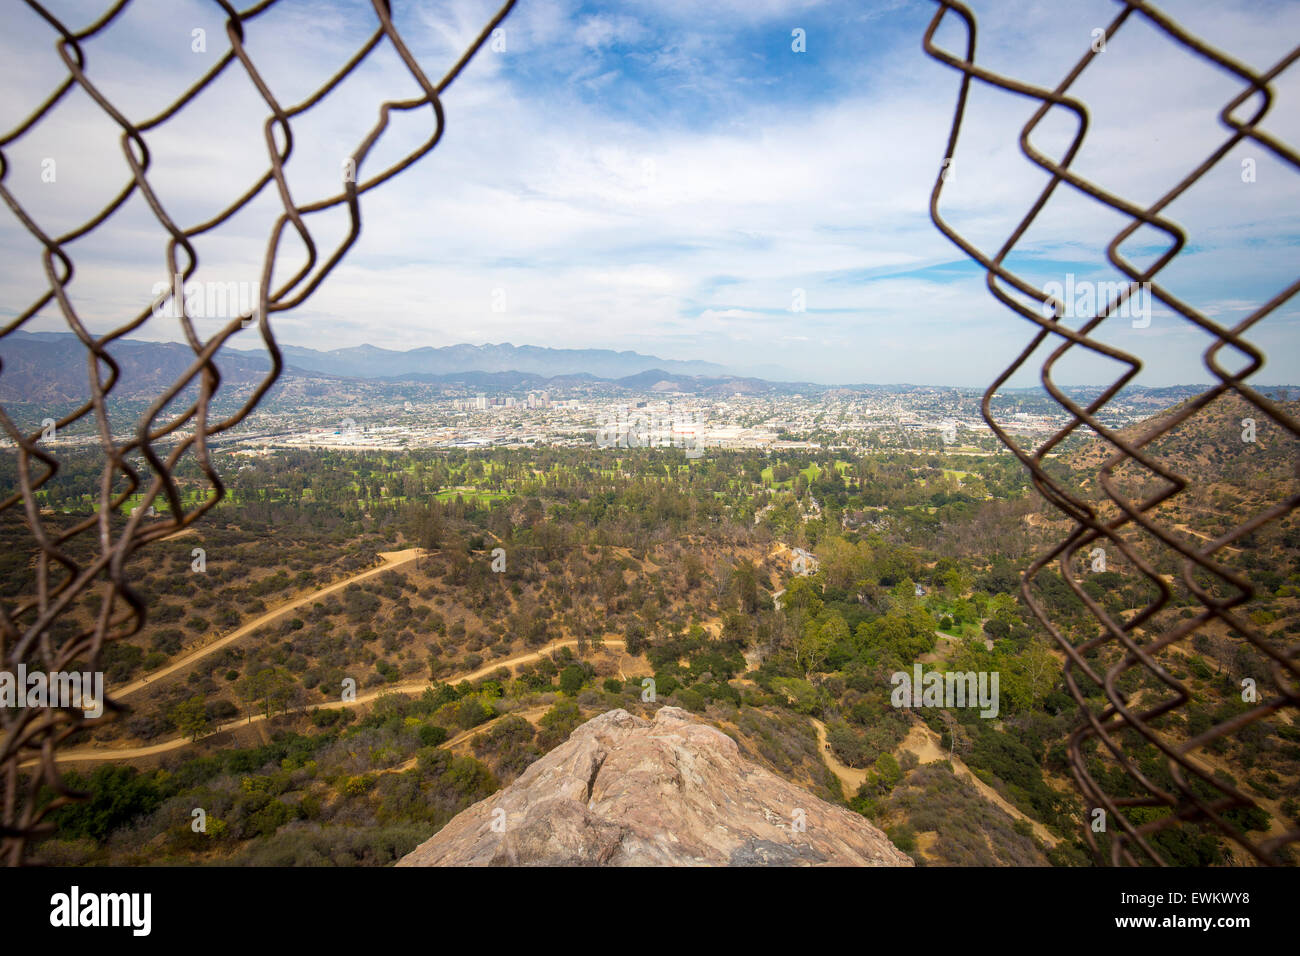 View of Los Angeles San Gabriel Valley from the top of Bee Rock Train in Griffith Park. Stock Photo